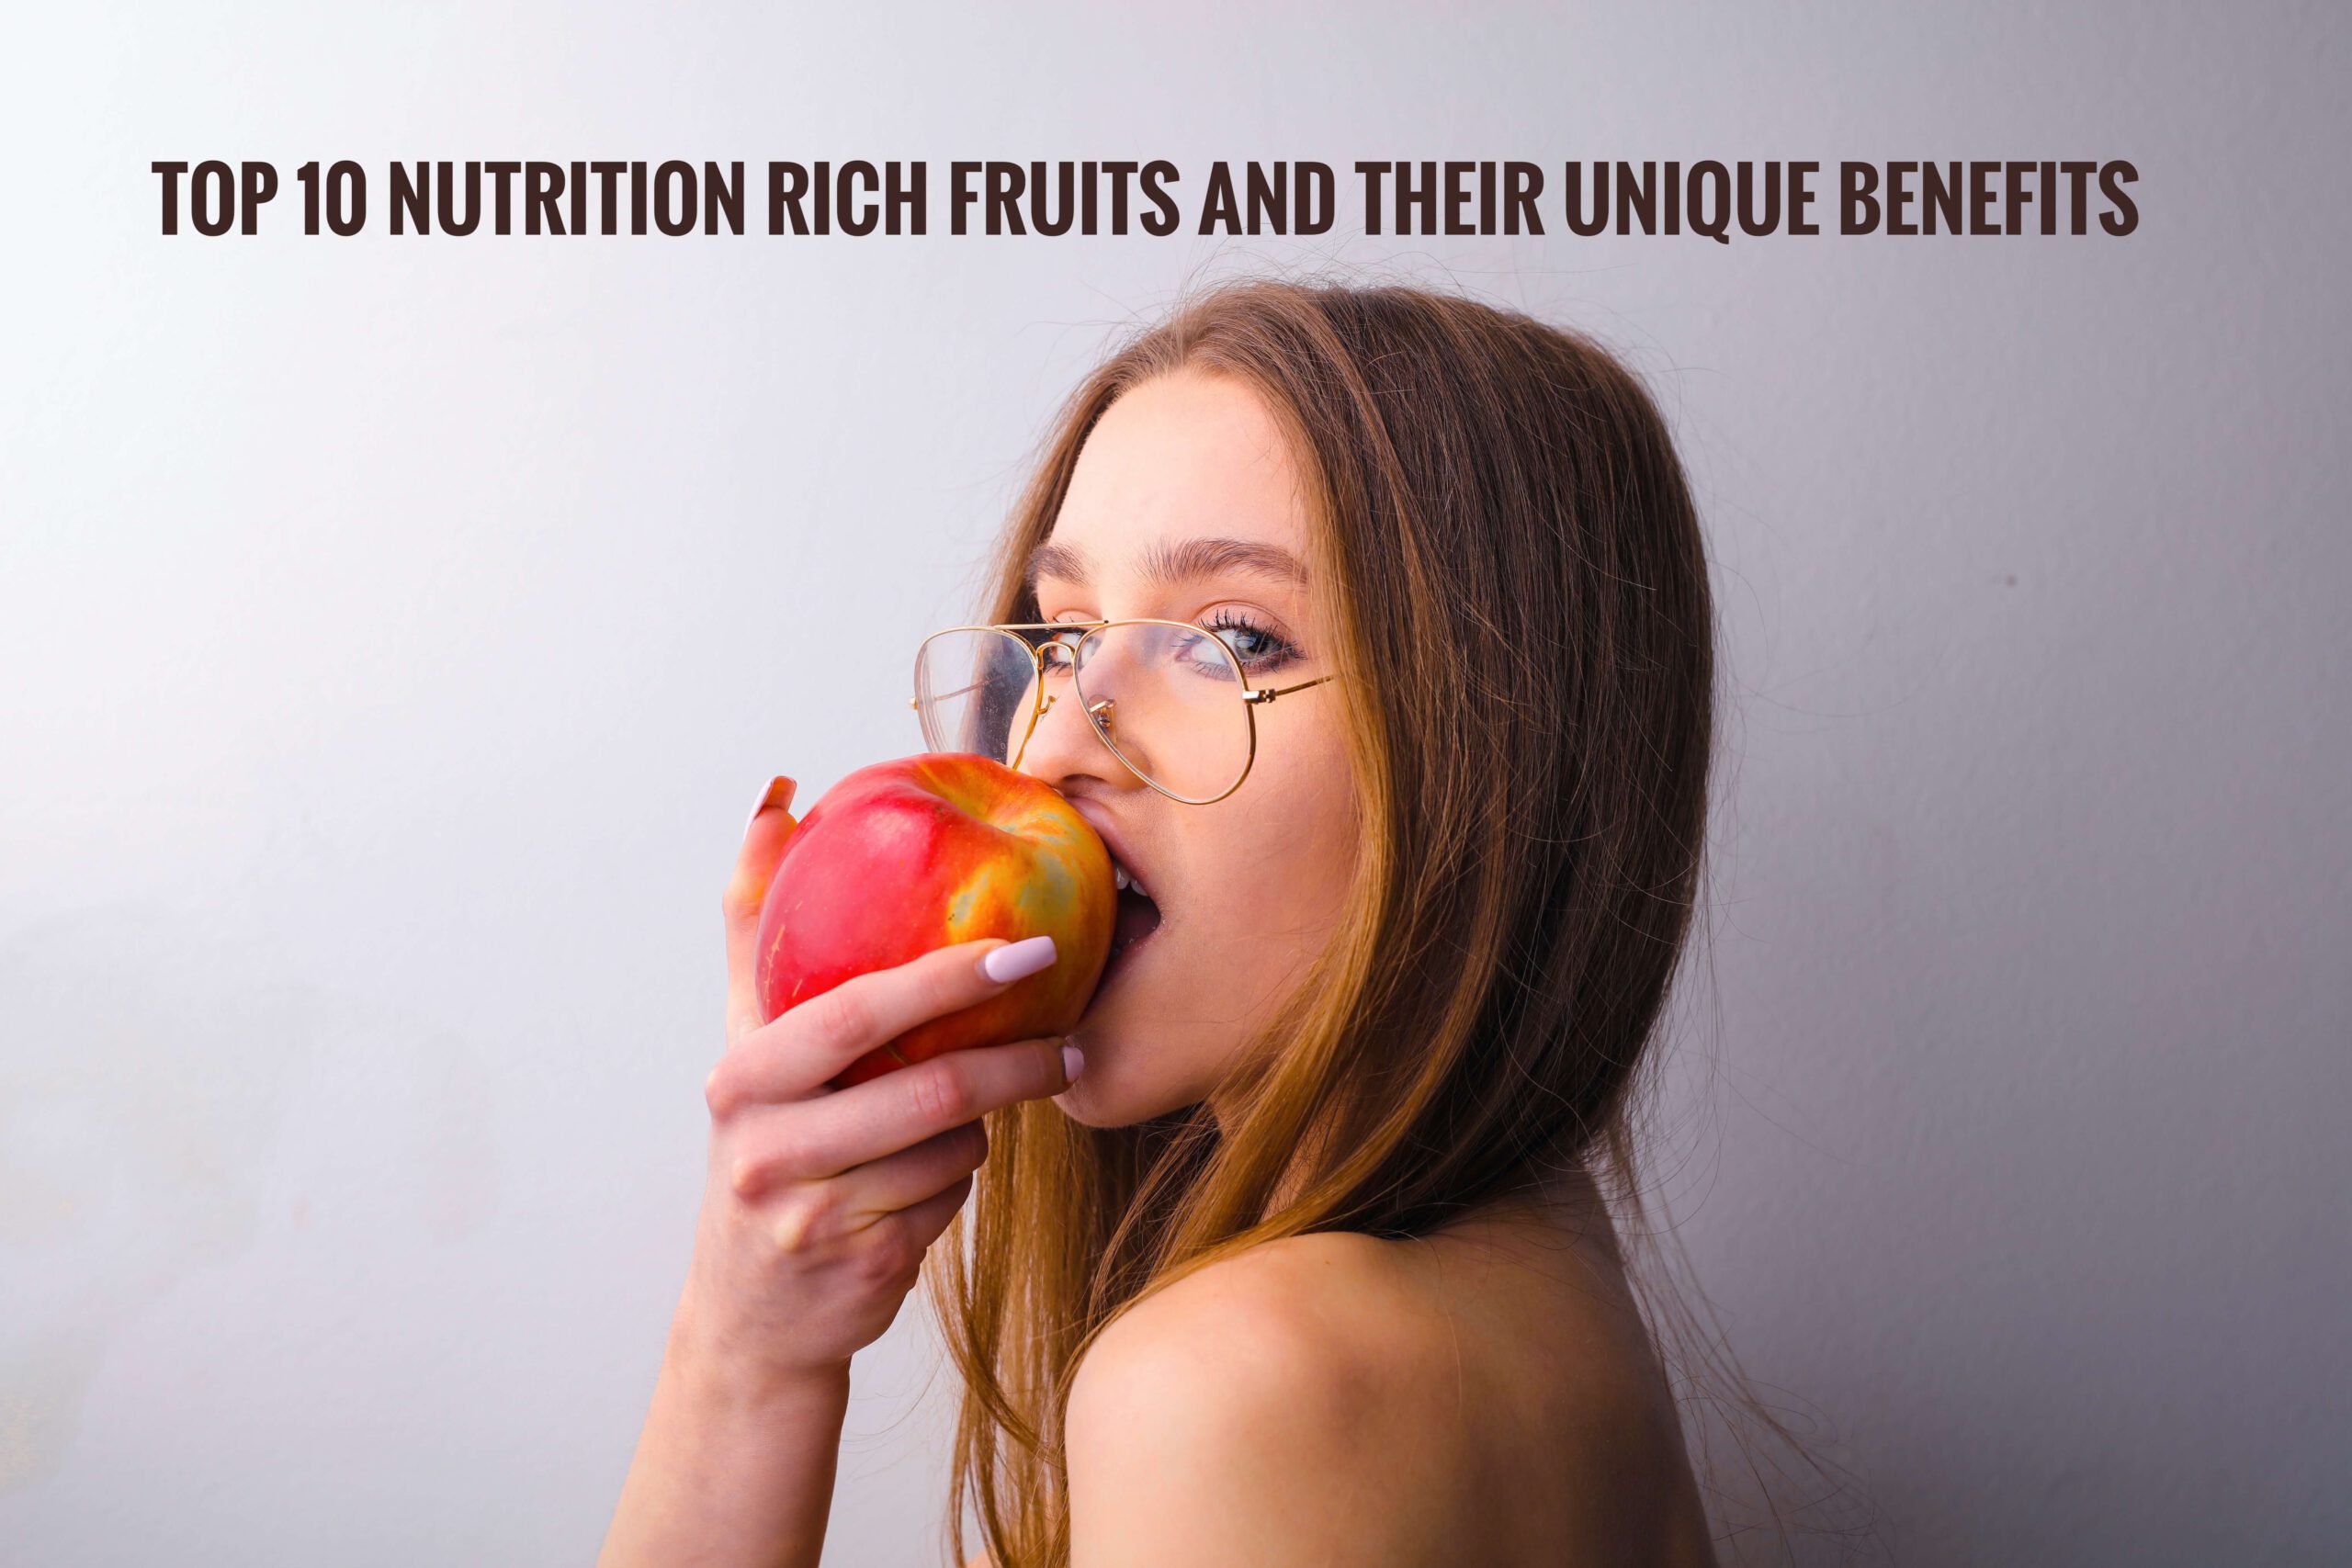 Top 10 Nutrition Rich Fruits And Their Unique Benefits